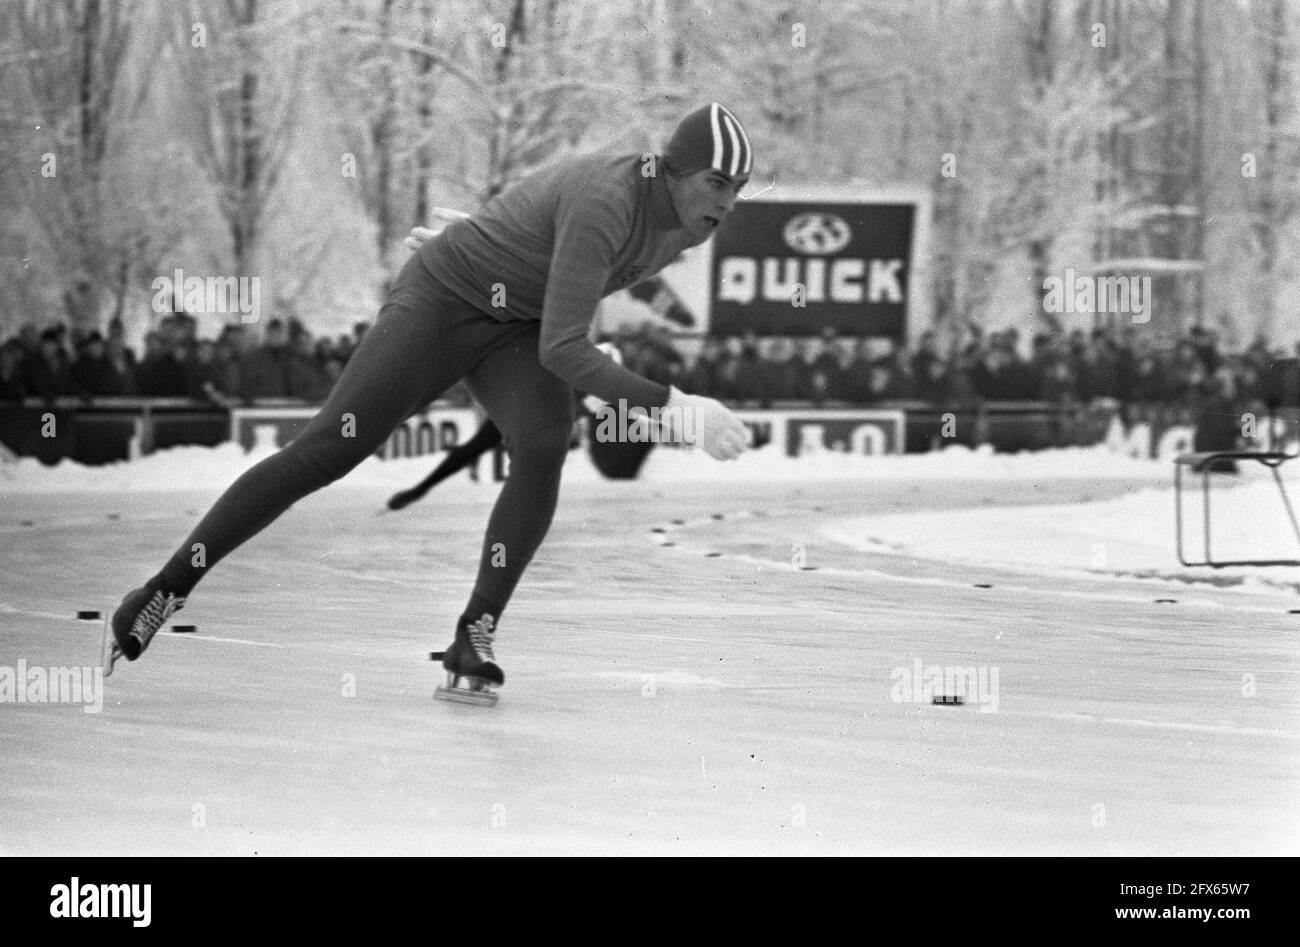 Ard Schenk in action, January 7, 1967, ice skating, The Netherlands, 20th century press agency photo, news to remember, documentary, historic photography 1945-1990, visual stories, human history of the Twentieth Century, capturing moments in time Stock Photo